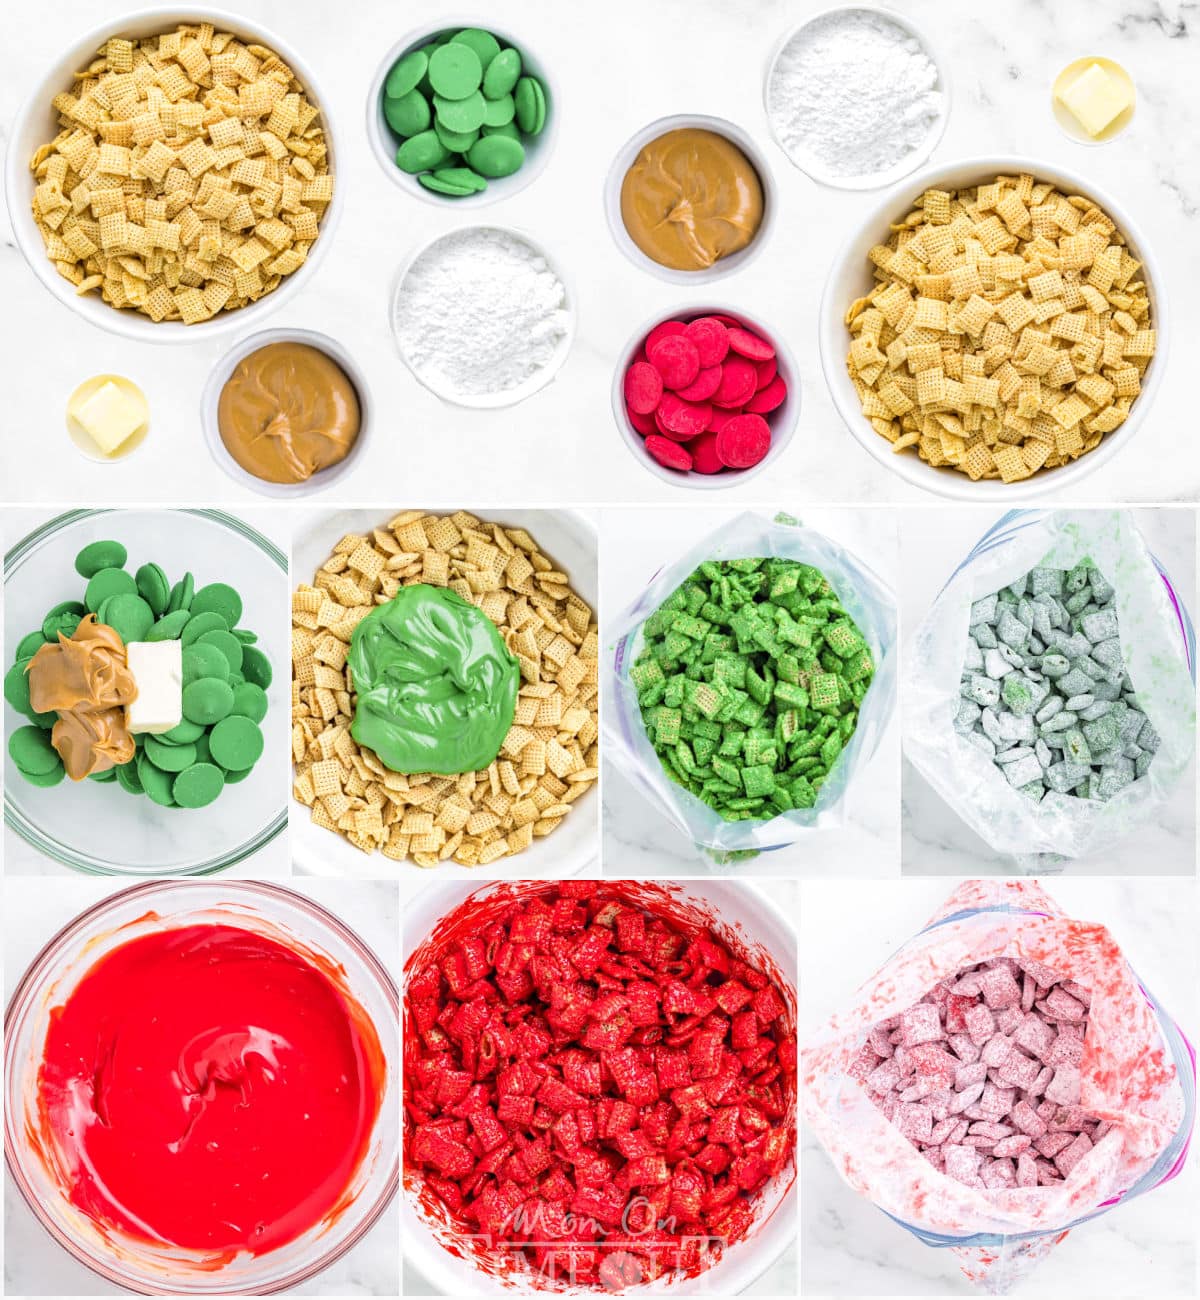 eight image collage showing christmas puppy chow ingredients and how to make it step by step.